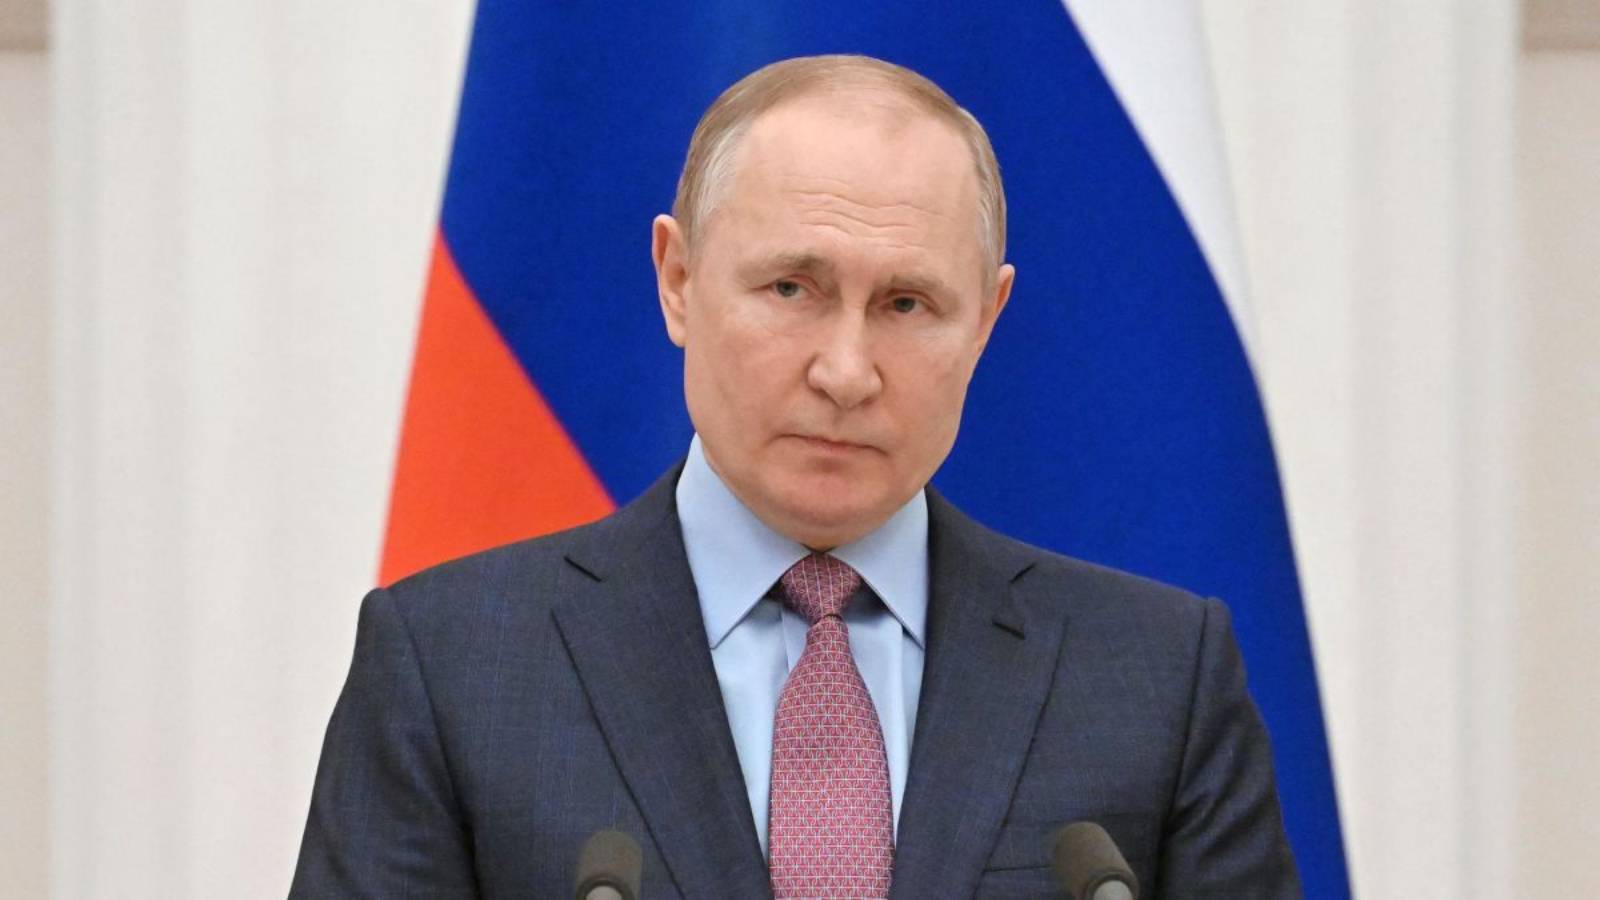 Vladimir Putin does not intend to conflict with NATO